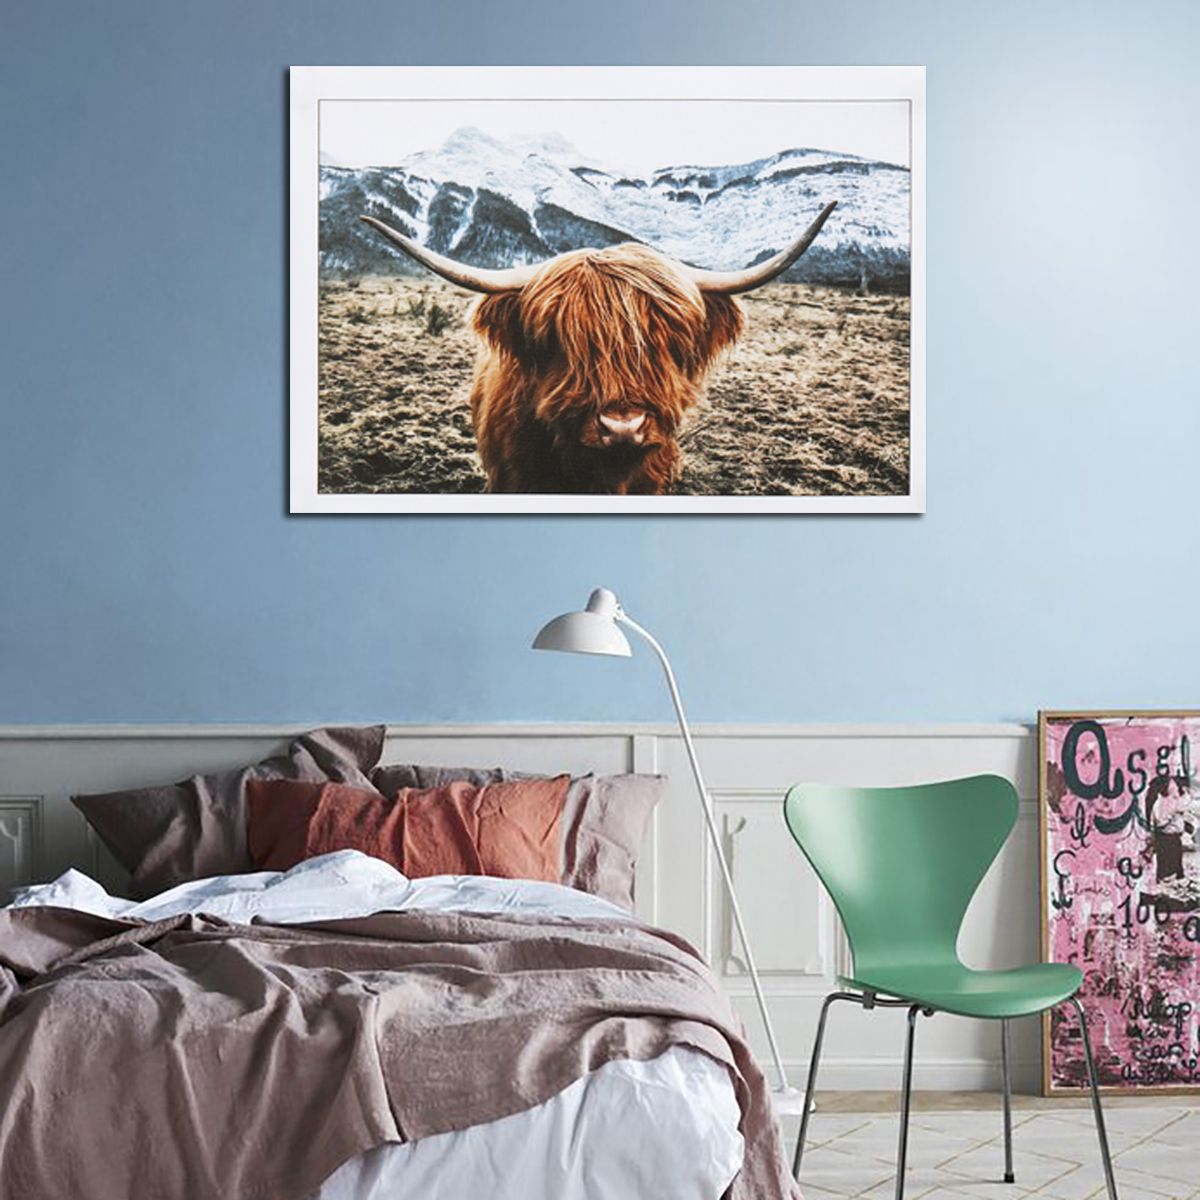 1-Piece-Canvas-Print-Painting-Highland-Cow-Poster-Wall-Decorative-Printing-Art-Pictures-Frameless-Wa-1743443-8